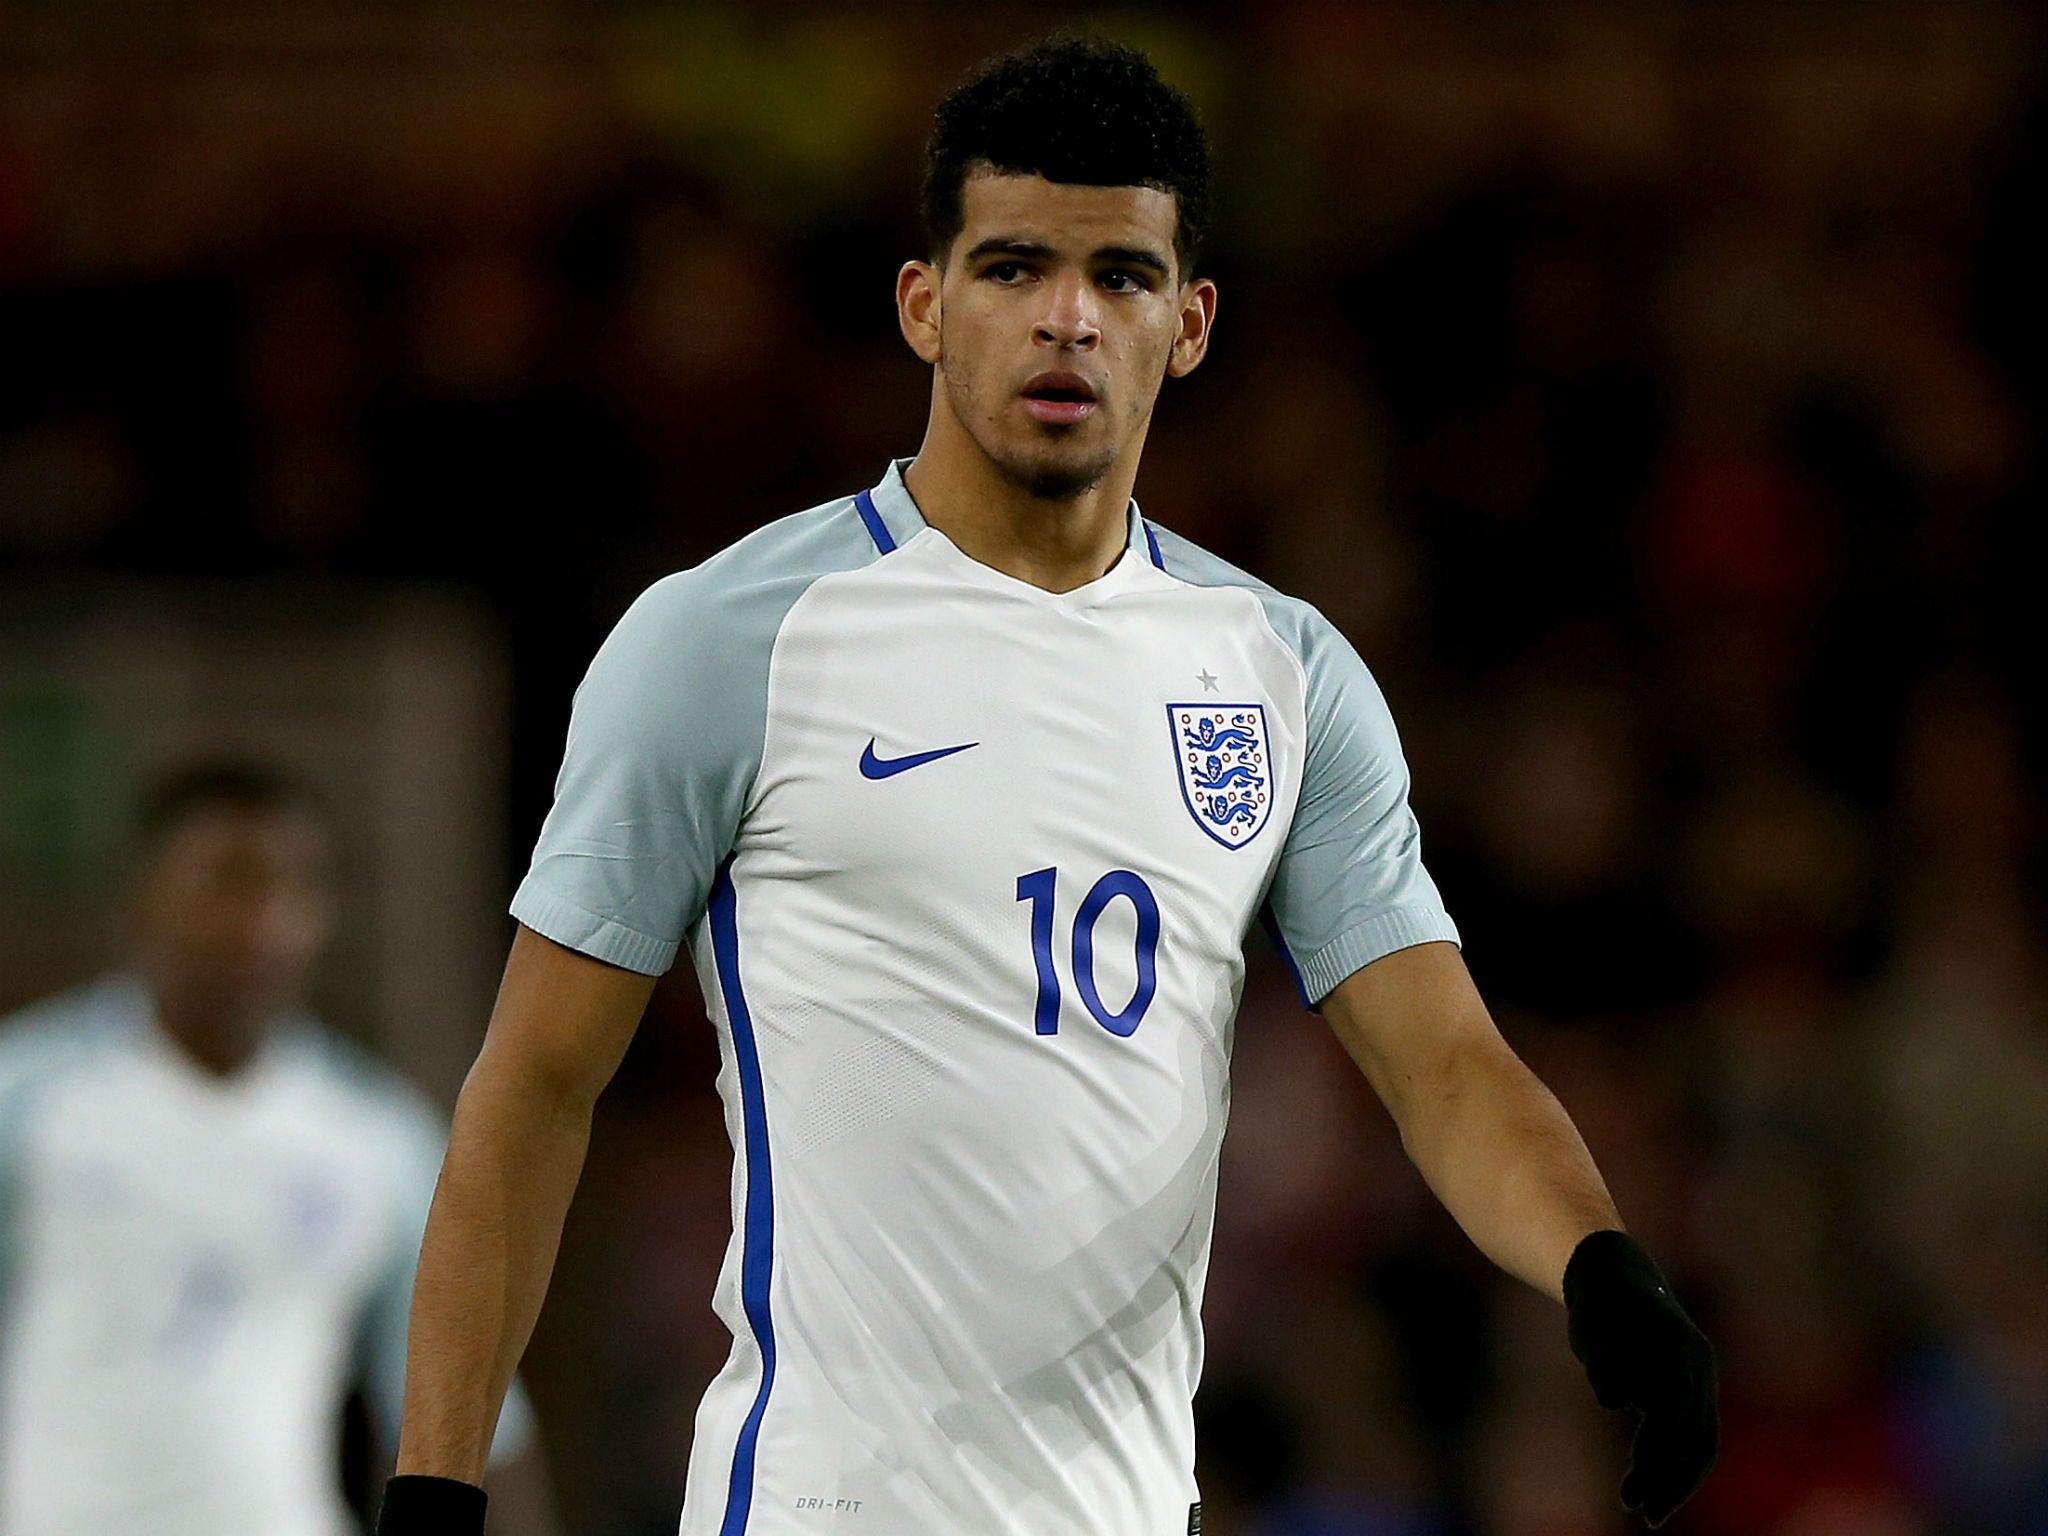 Solanke left for Liverpool after starring for England's younger sides